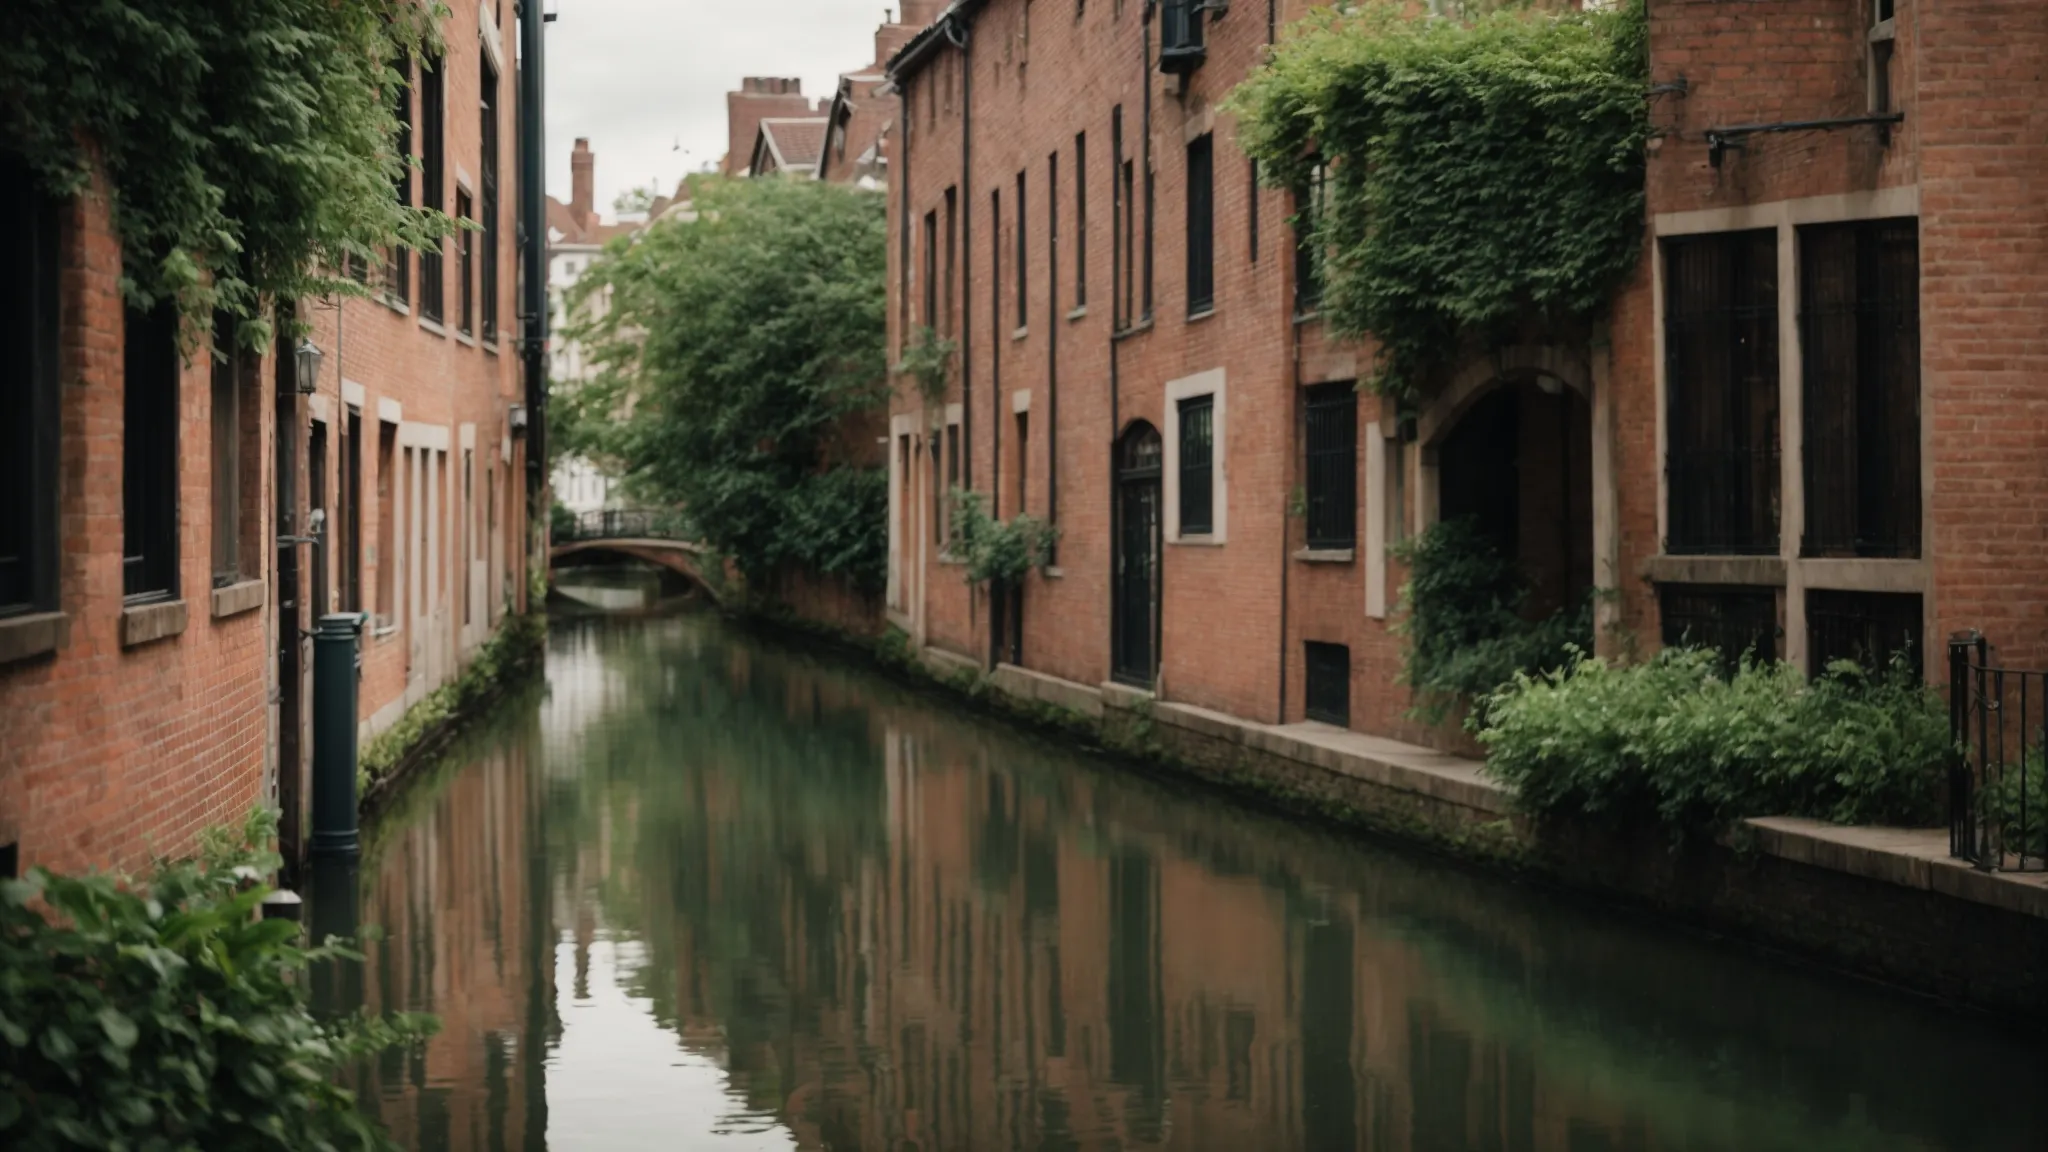 in the heart of the city, a serene canal bordered by lush greenery and historic brick buildings offers a picturesque escape from urban hustle.